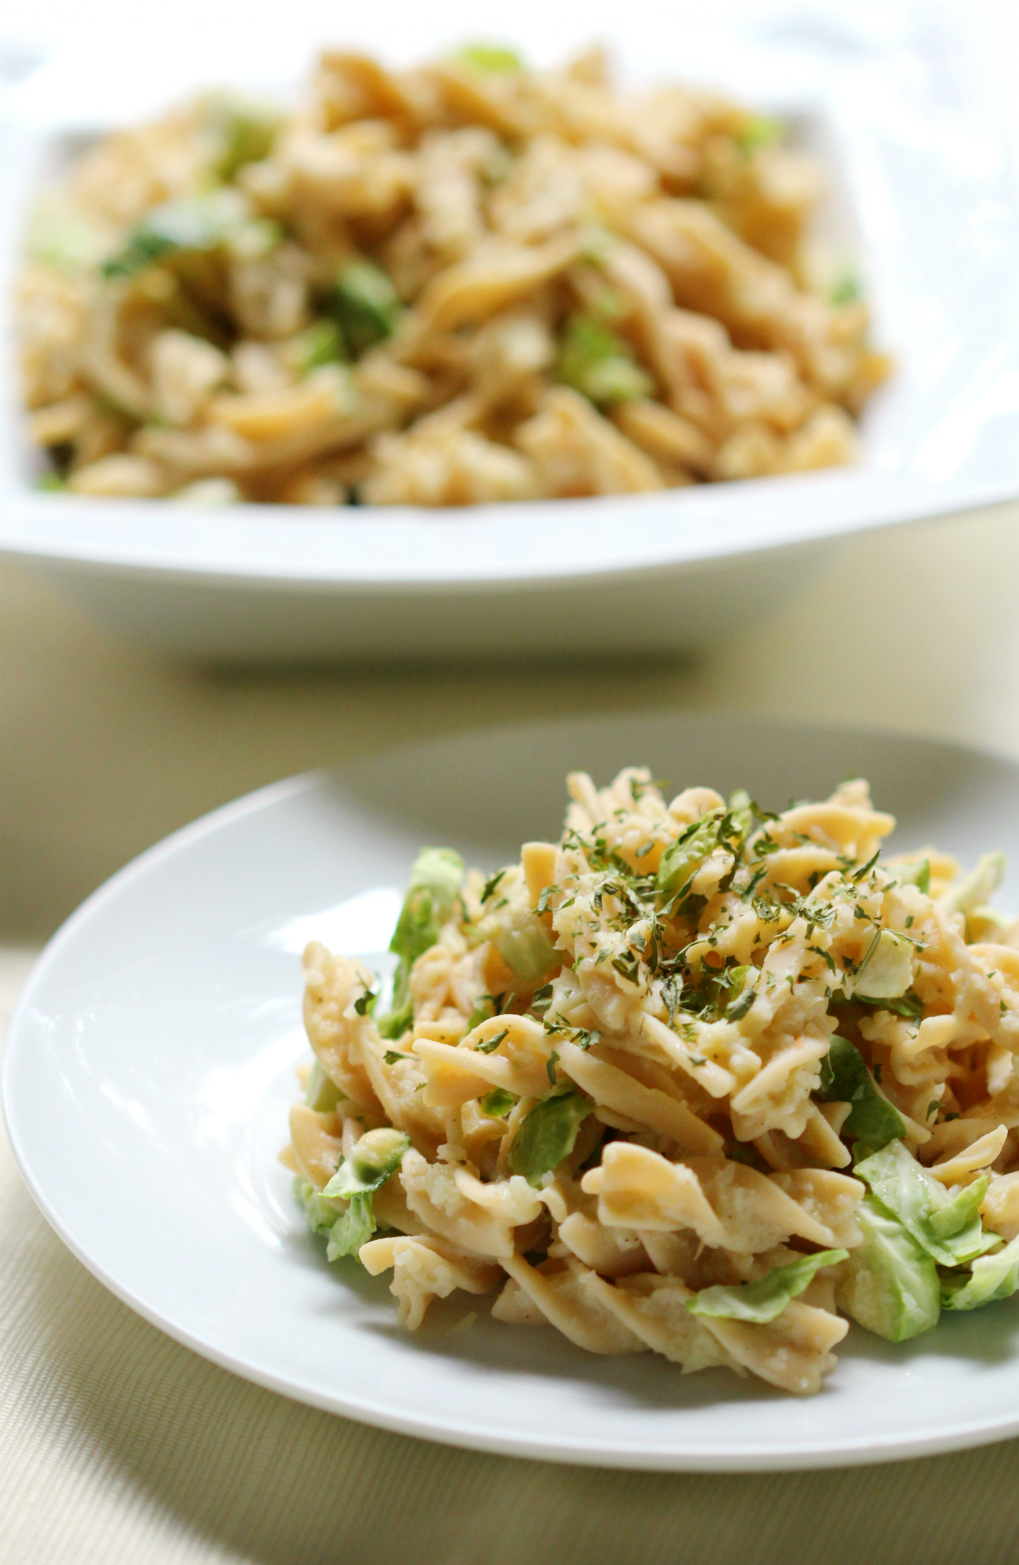 Rotini Pasta Alfredo with Shaved Brussels Sprouts | Strength and Sunshine @RebeccaGF666 A healthy veggie-packed, grain-free rotini pasta Alfredo that you won't know is gluten-free or vegan! The ultimate comfort food dinner recipe you can make to nourish the whole family (and get them to eat brussels sprouts)!